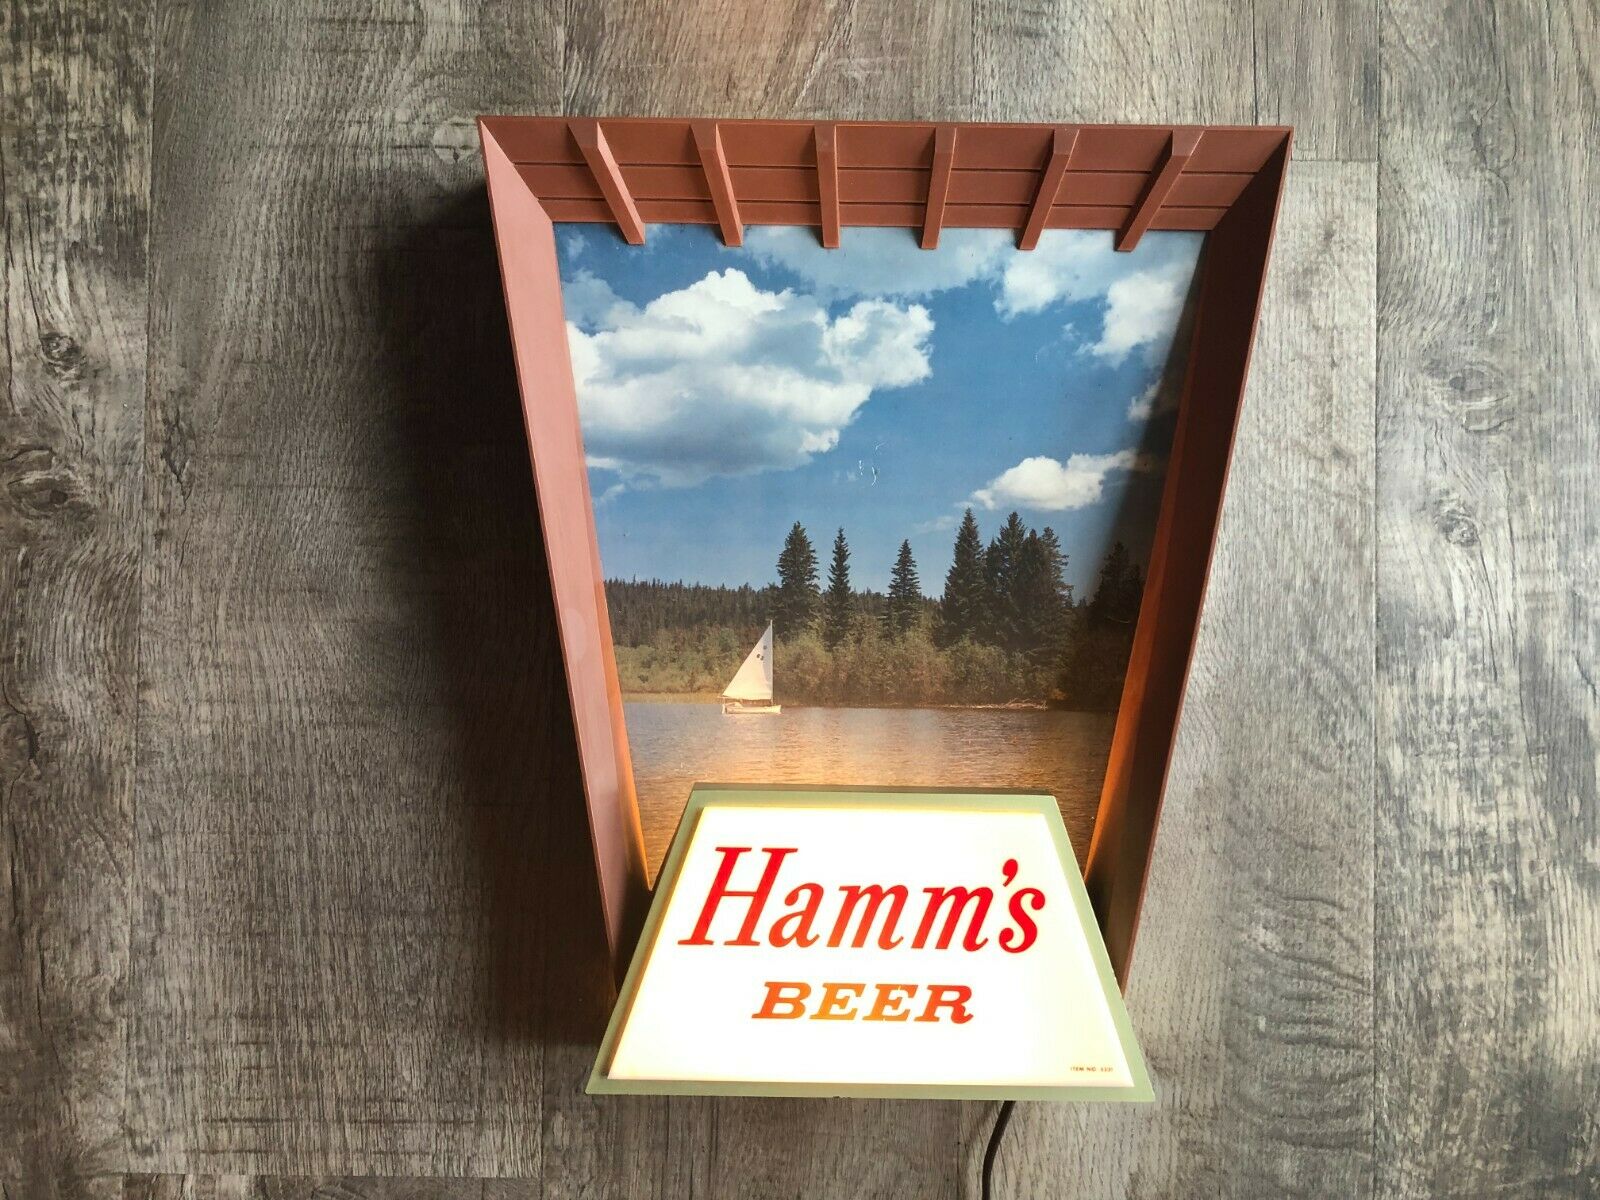 1950s Hamms Lighted Breweriana: Vintage Hamms Sailboat Lake Lighted Sign - Works